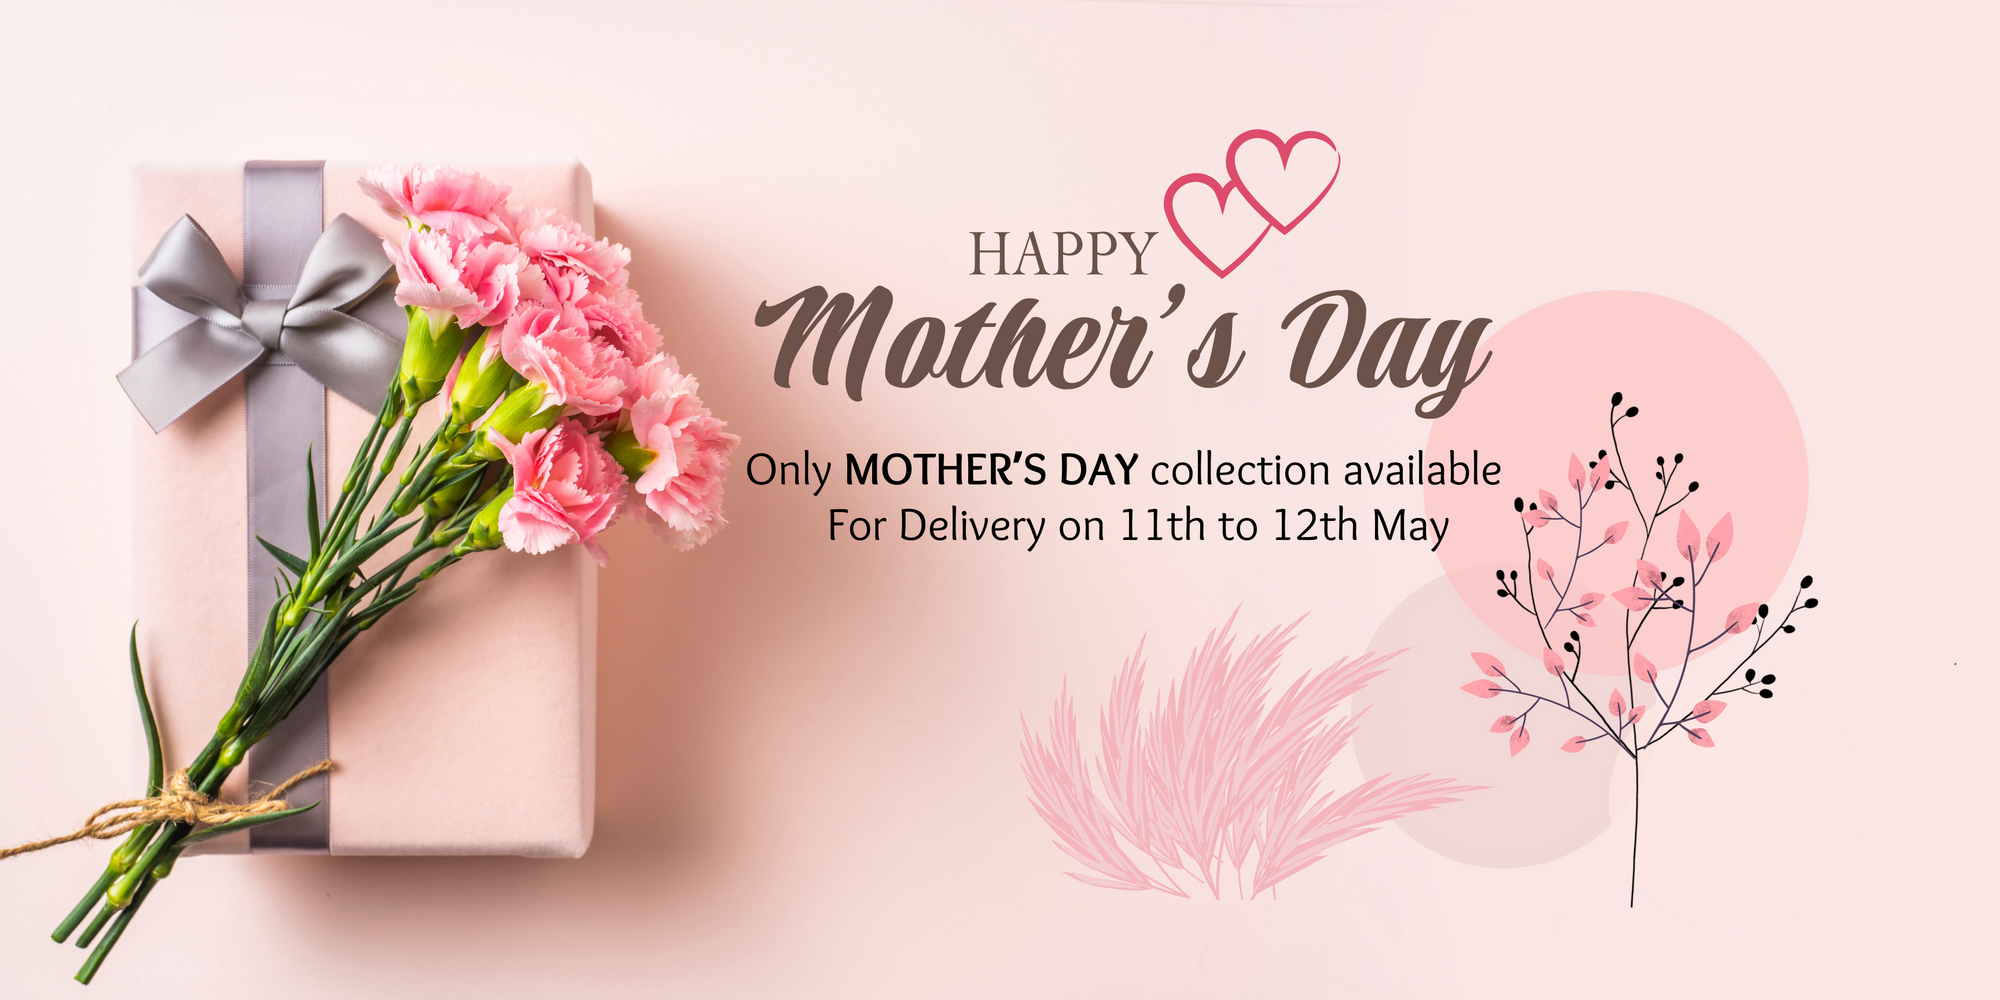 Mothers Day Collection - Mothers Day Flower Delivery Singapore - Well Live Florist